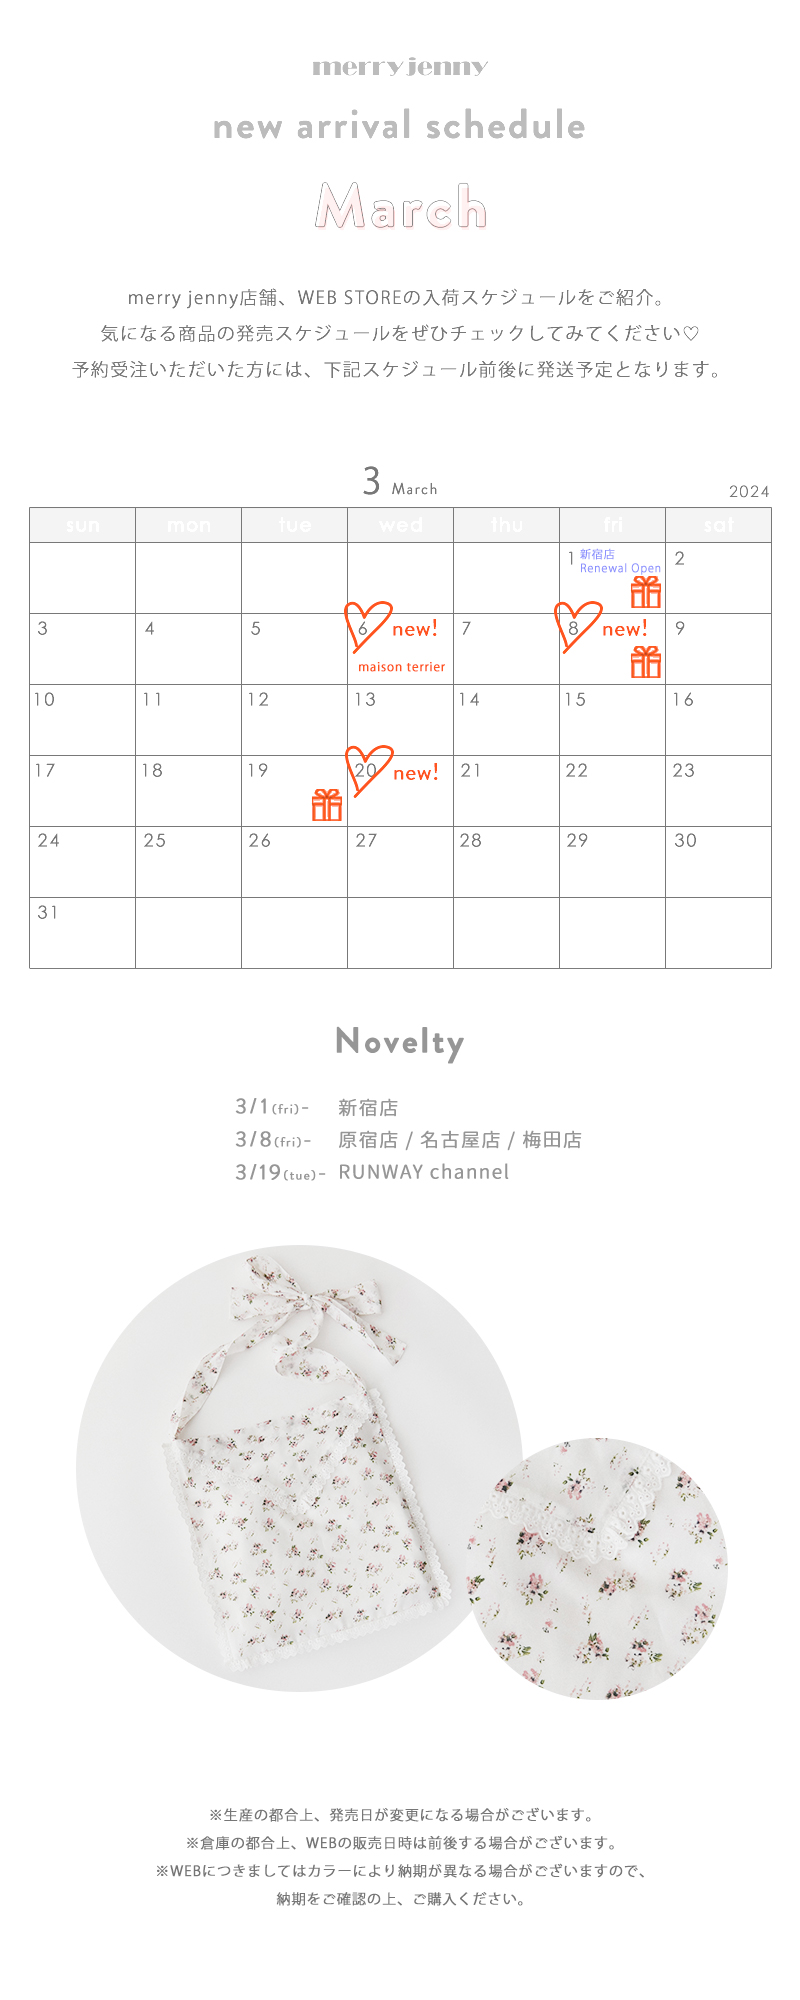 ★March new arrival schedule